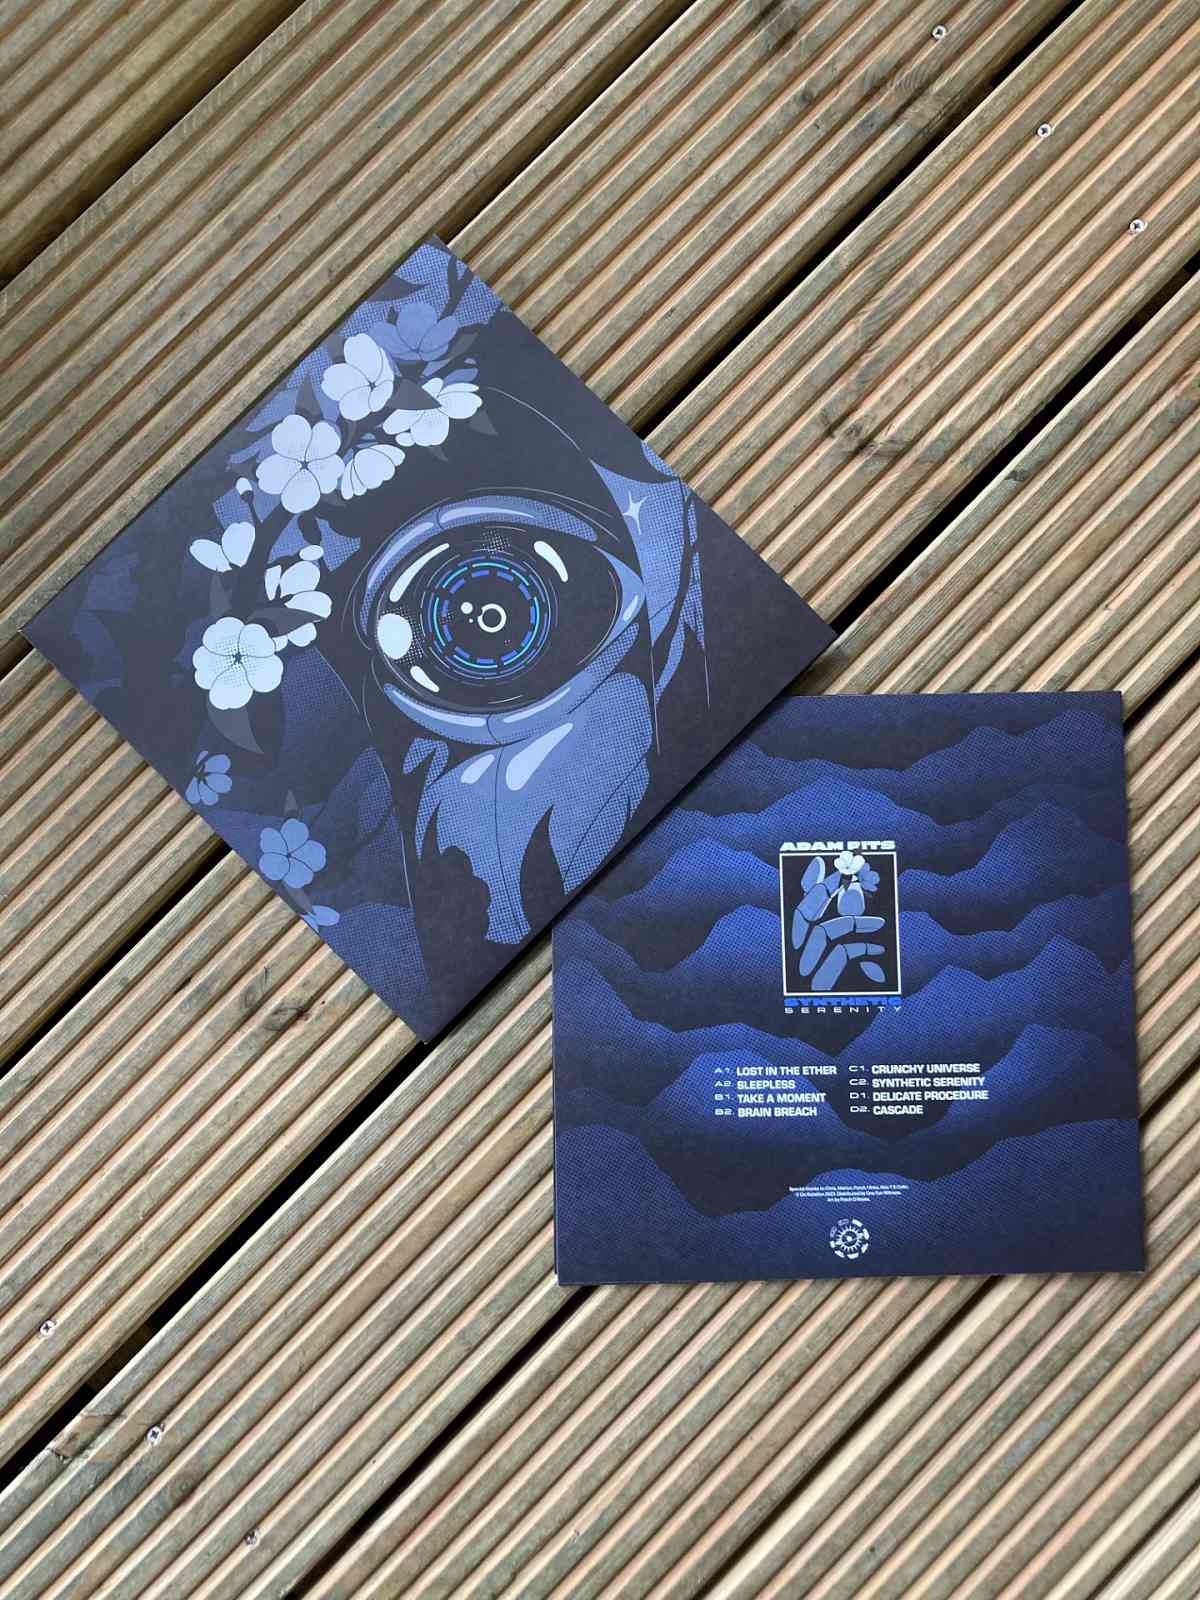 Adam Pits: Synthetic Serenity Vinyl Record on Wooden Decking